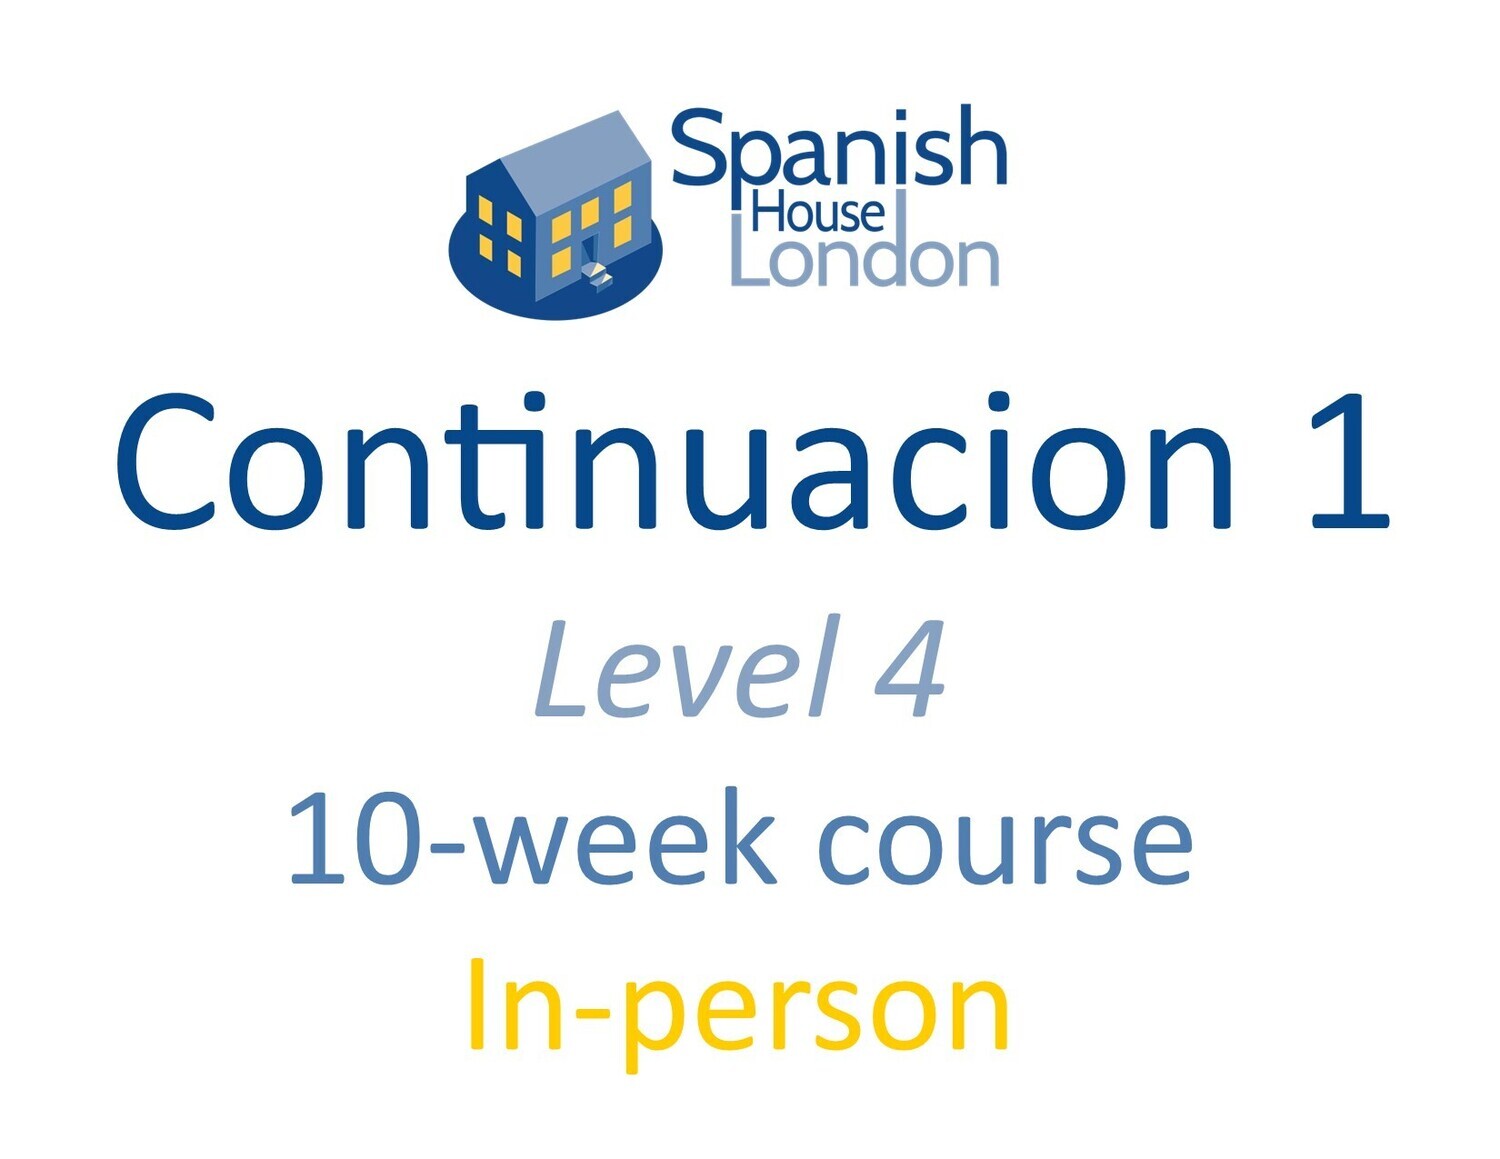 Continuacion 1 Course starting on 15th August at 4.15pm in Clapham North